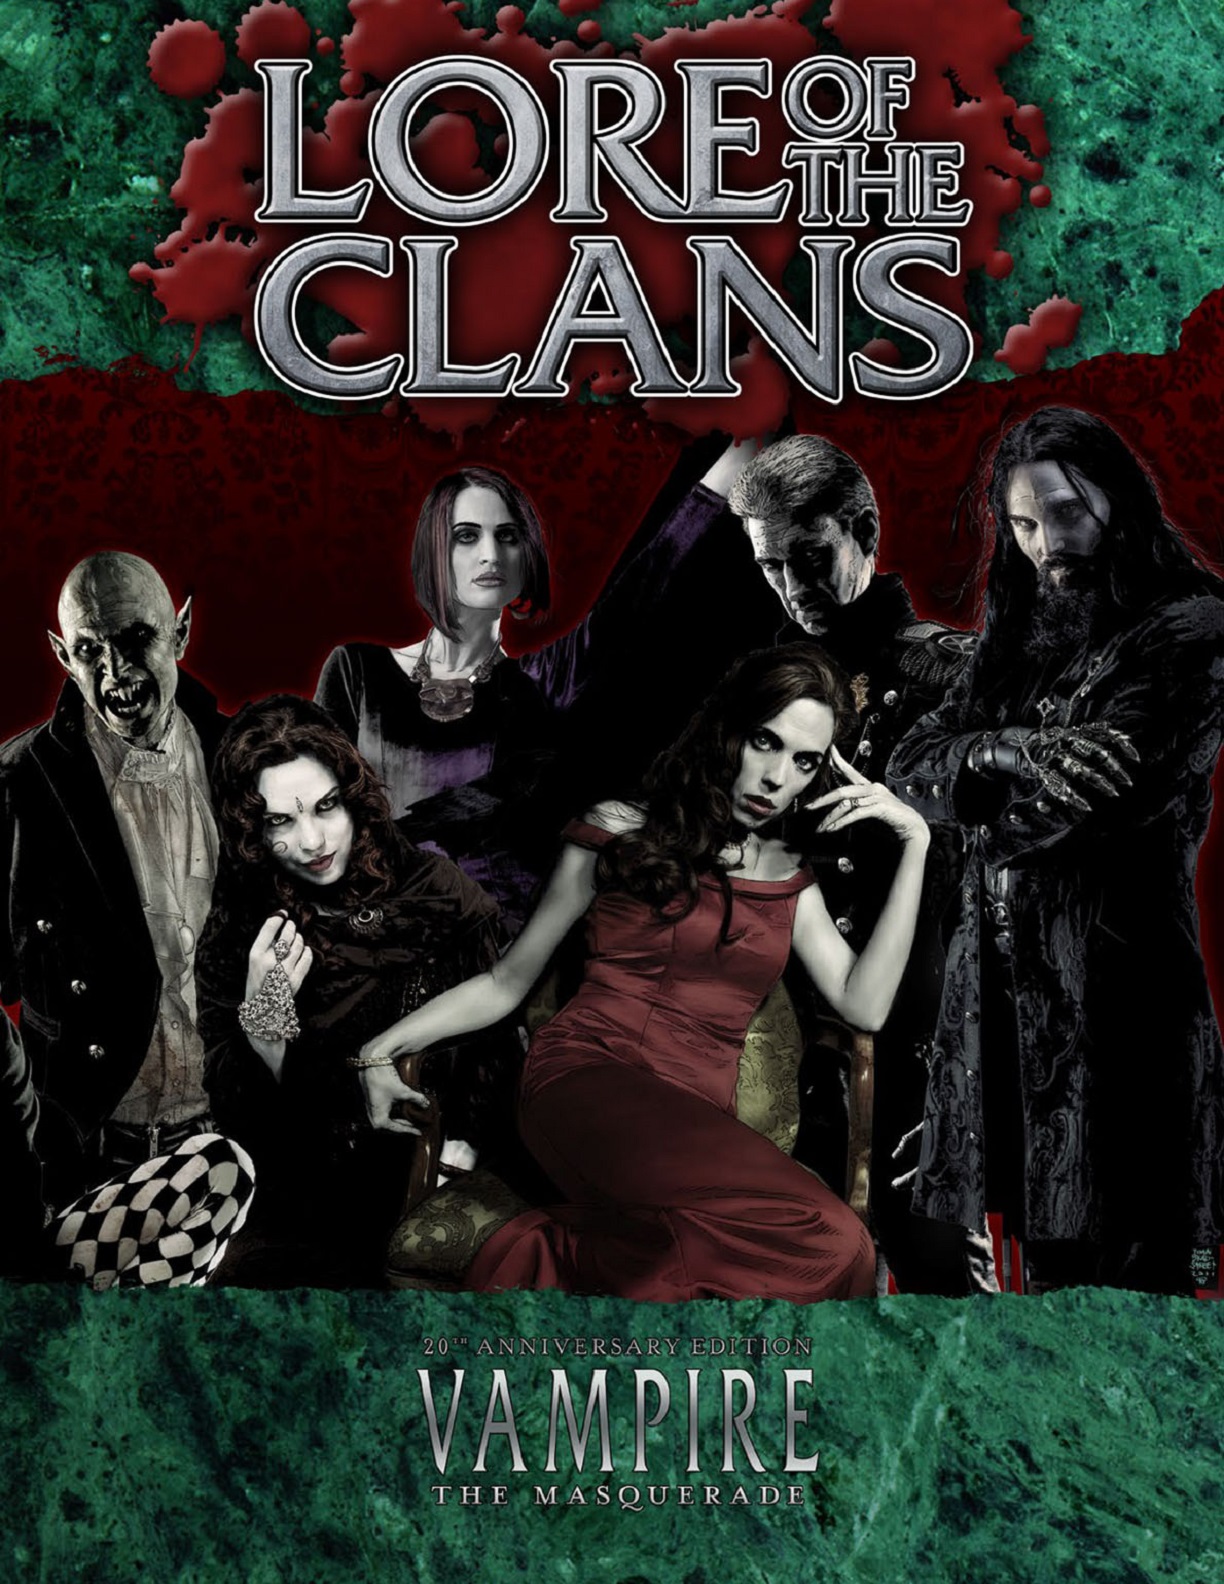 The Clans to Begin the Masquerade